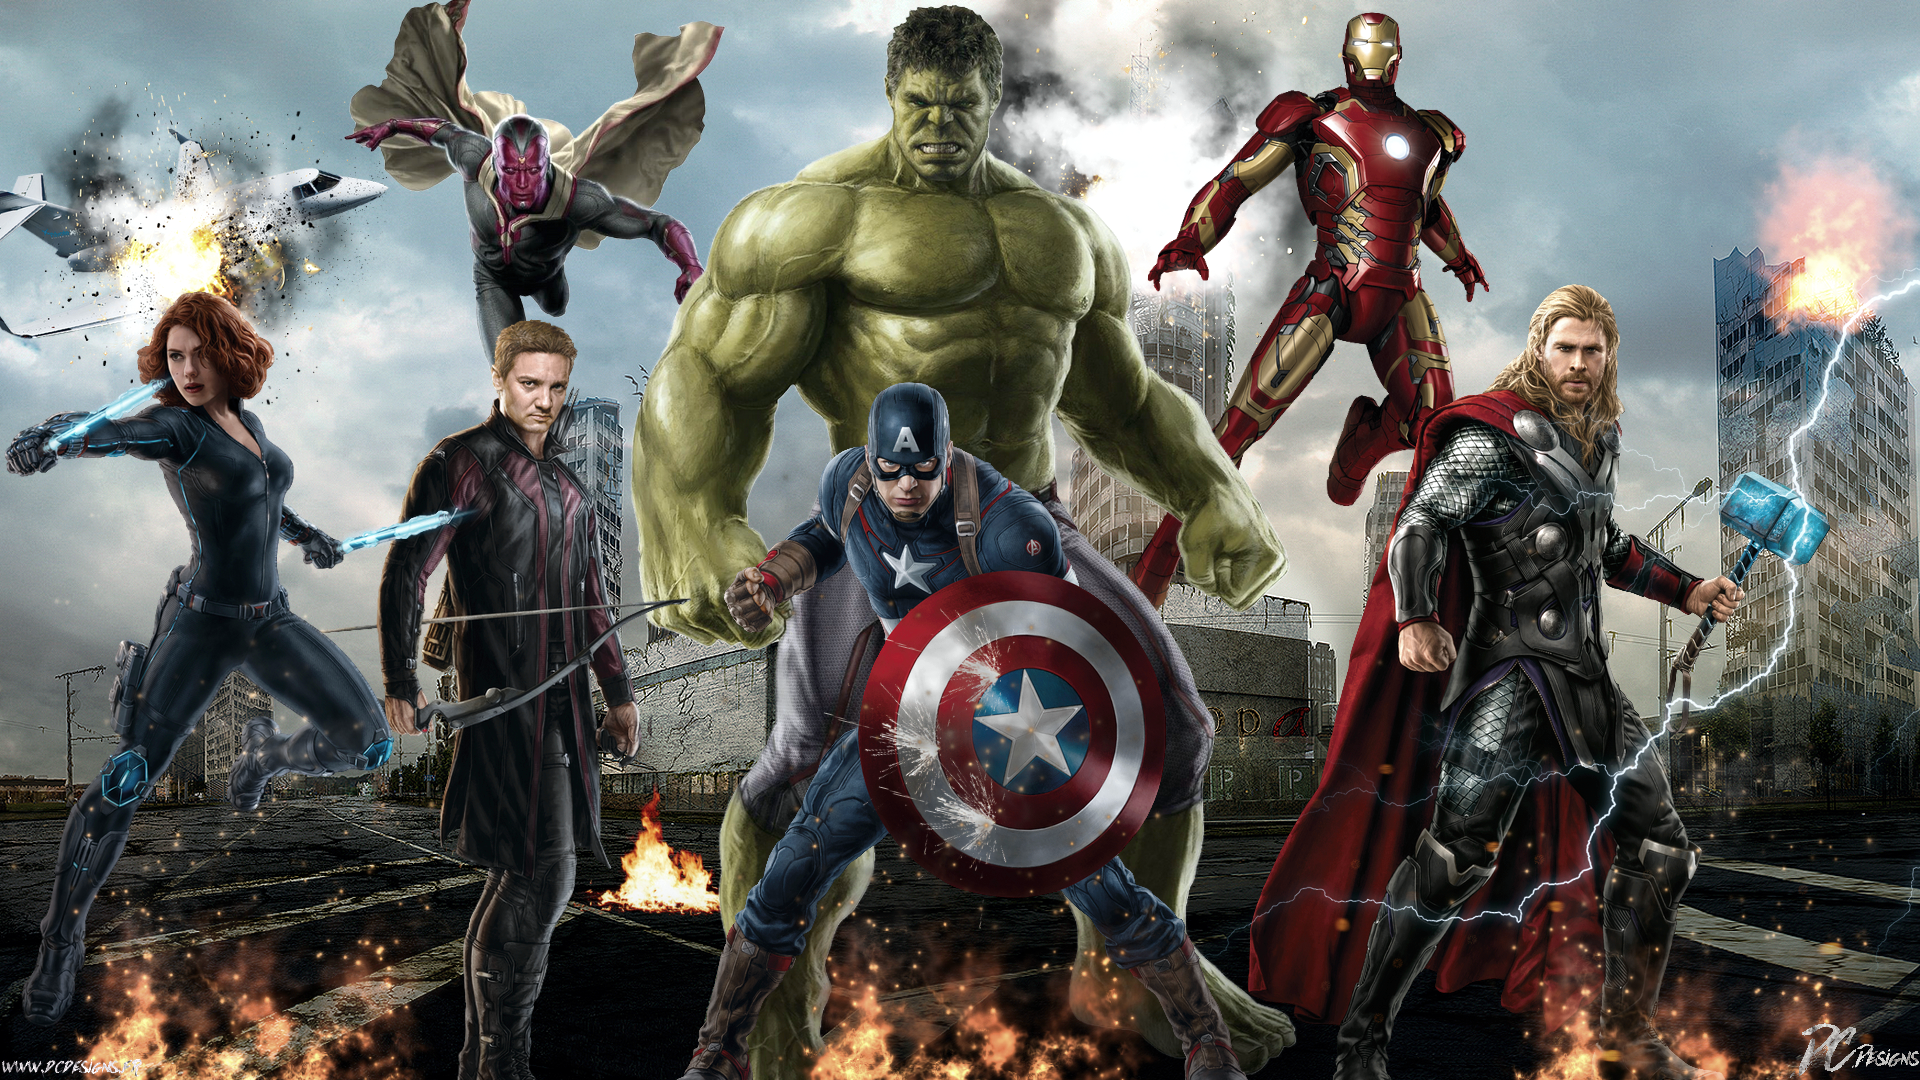 Movie Avengers Age Of Ultron Age Of Ultron Marvel Poster Fan Art The